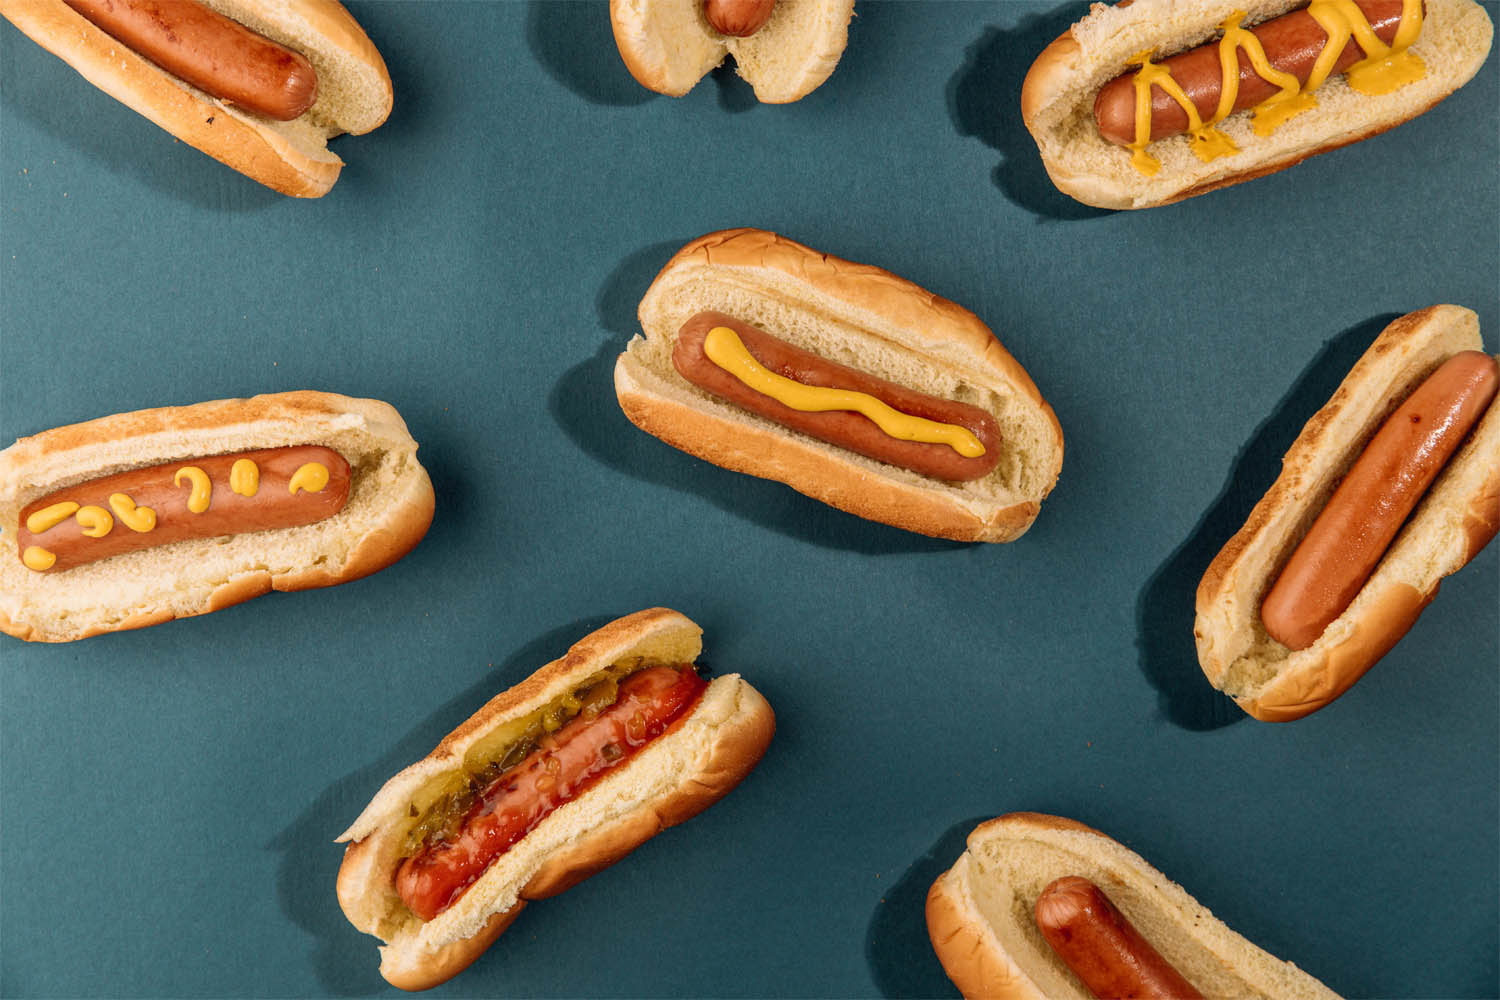 Hot dog sandwiches on a teal background